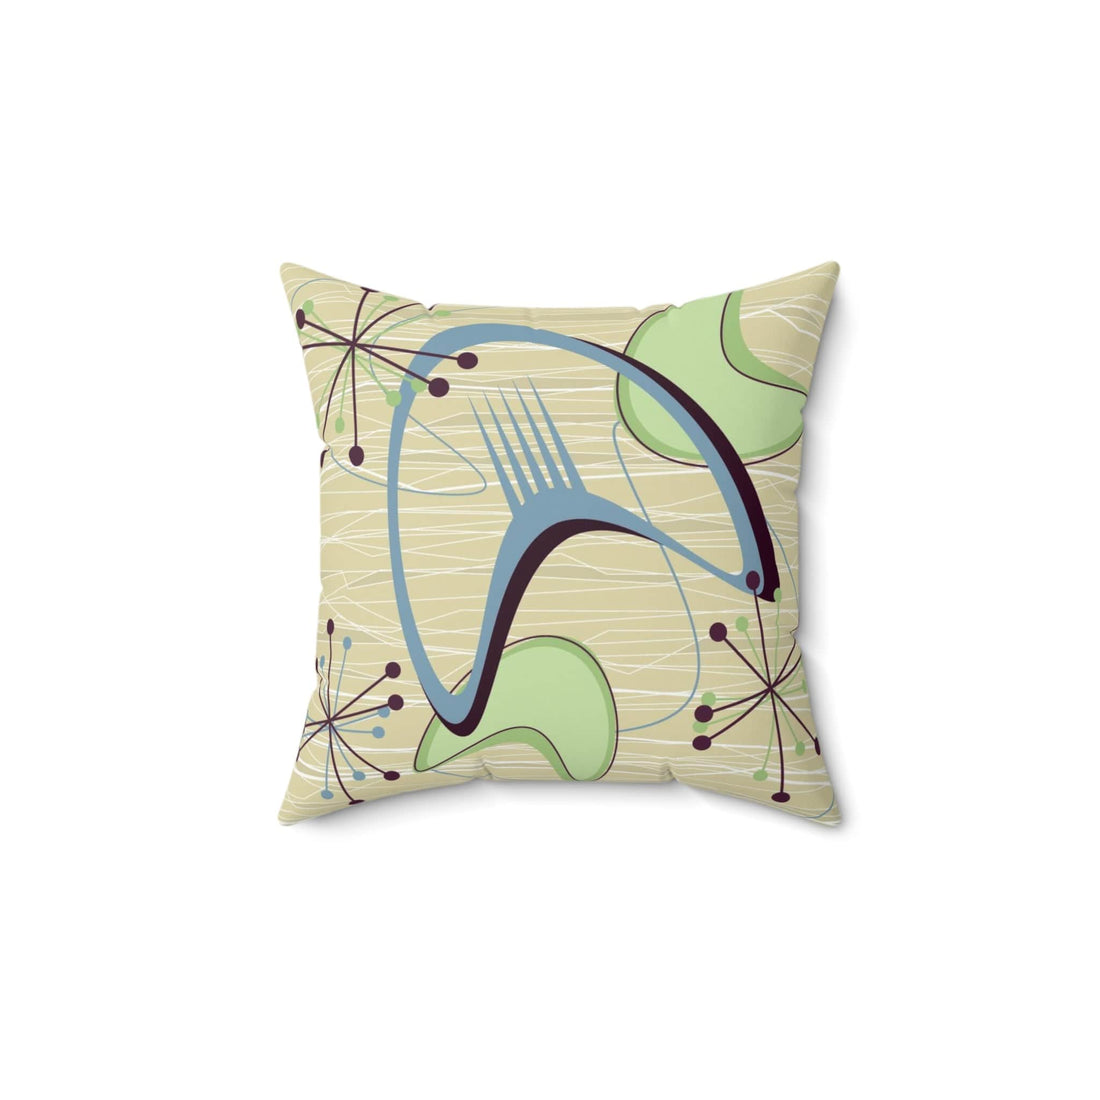 Kate McEnroe New York 1950s Atomic Boomerang Mid Century Modern Throw Pillow in Retro Vintage Beige, Blue, Green Geometric Starbursts, MCM Abstract Accent PillowThrow Pillows31105224266807664878